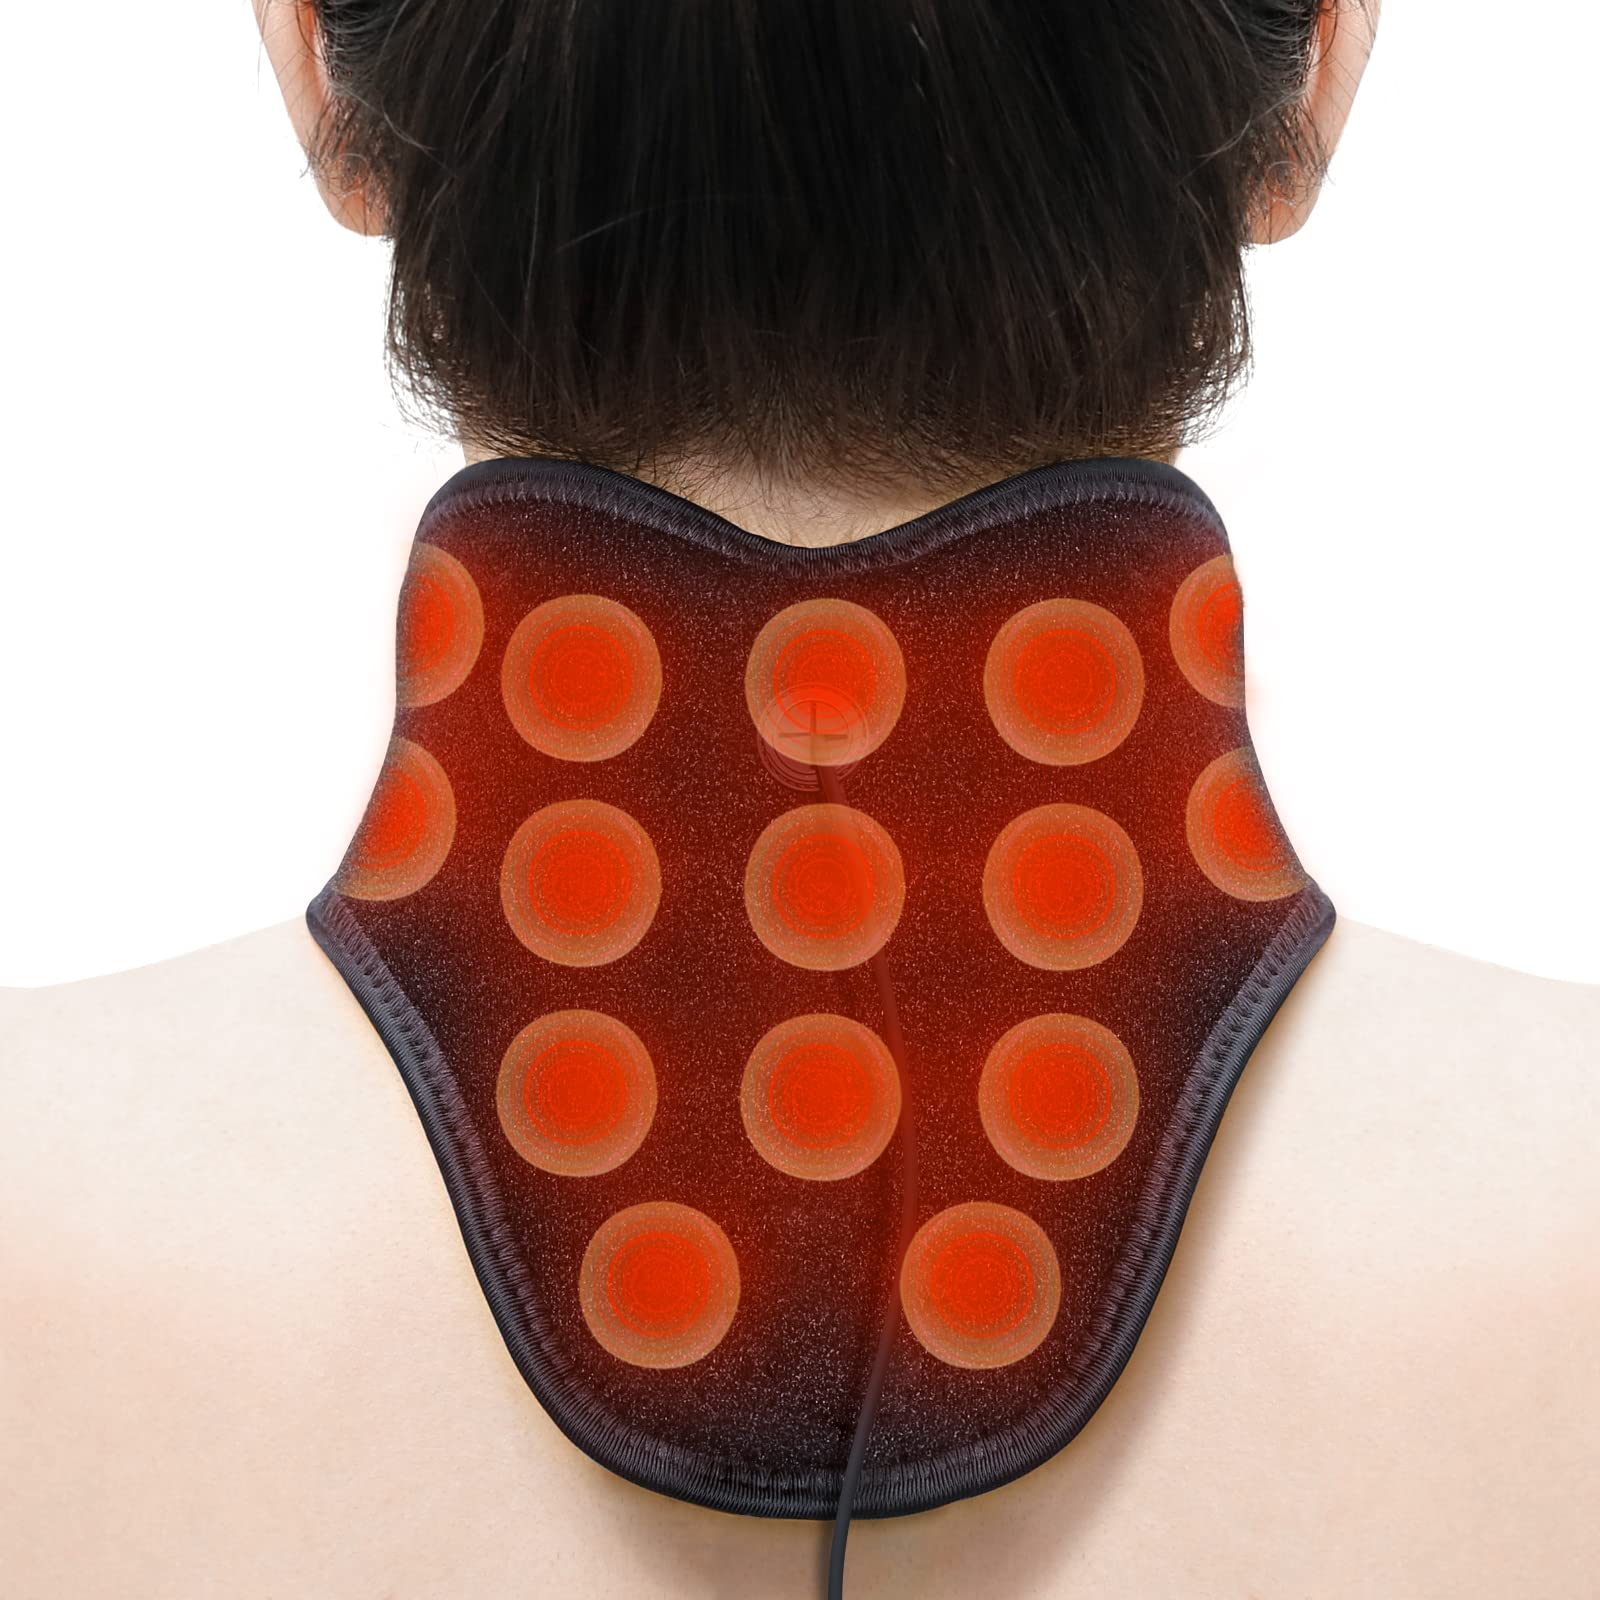  Neck Pain Relief Heated Neck Wrap, Weighted Neck Heating Pad  Electric for Cervical Pain, Stiff Neck, Neck Tension Relief : Health &  Household